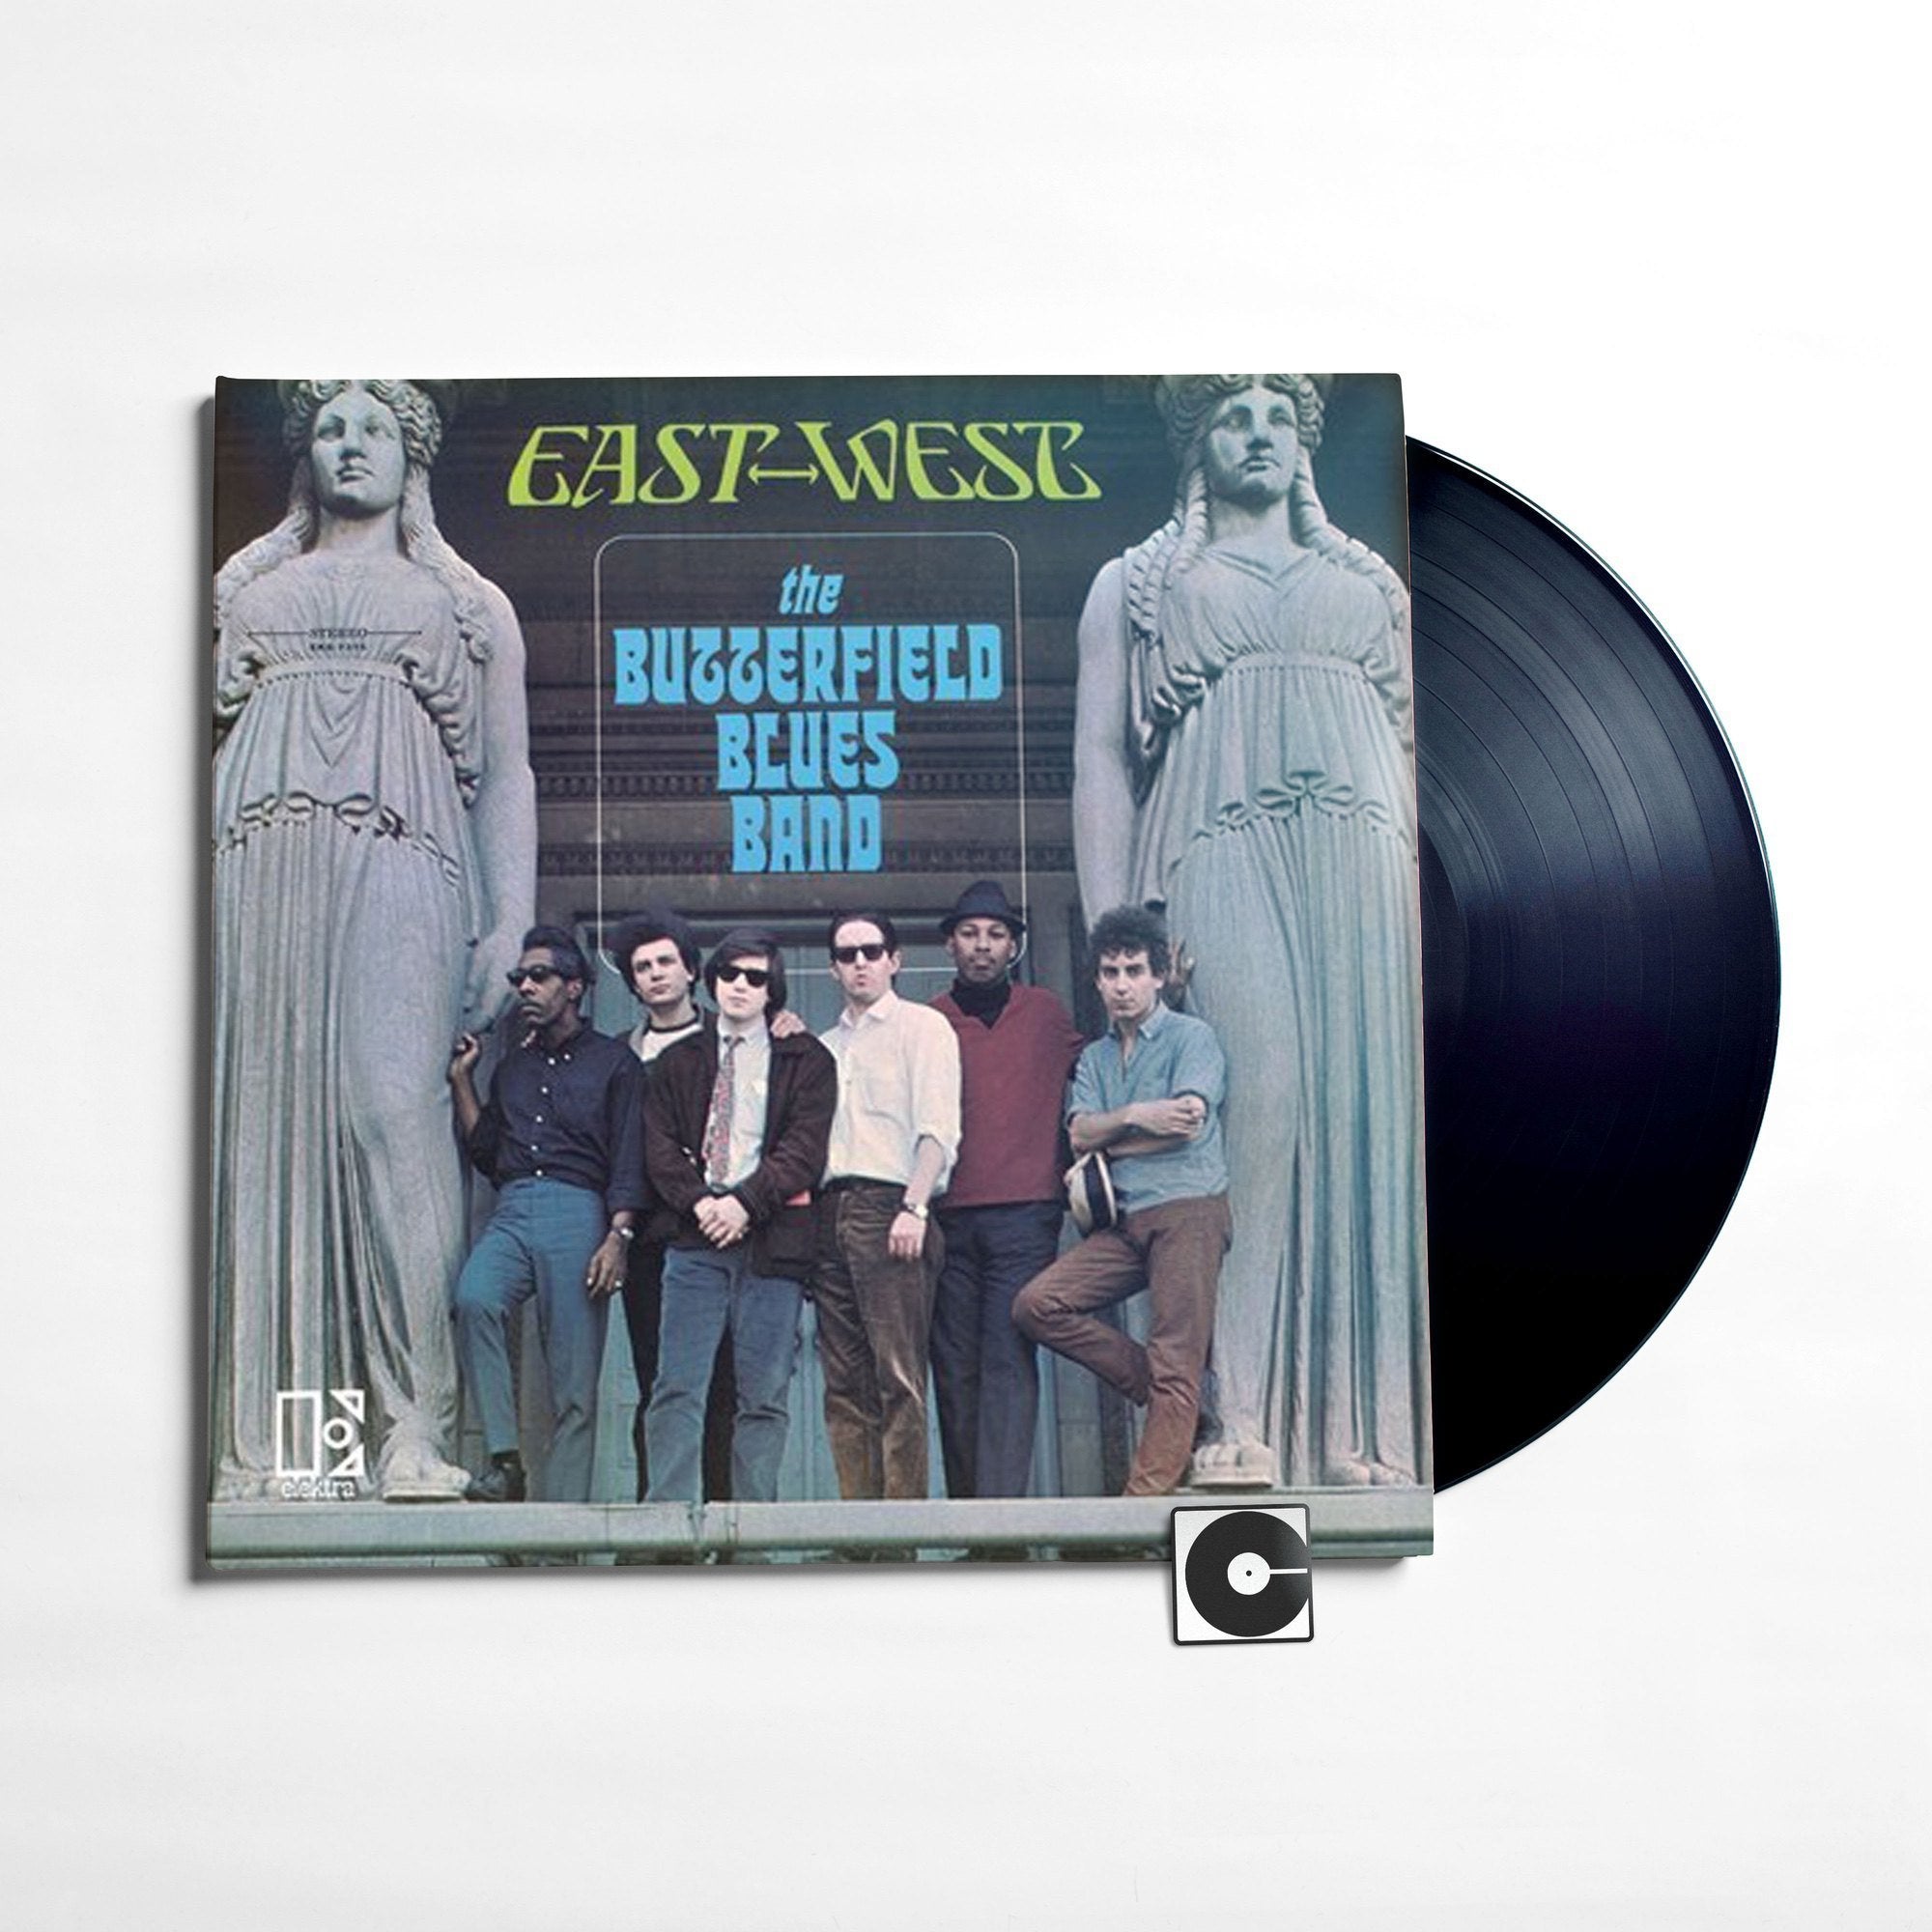 The Butterfield Blues Band - 